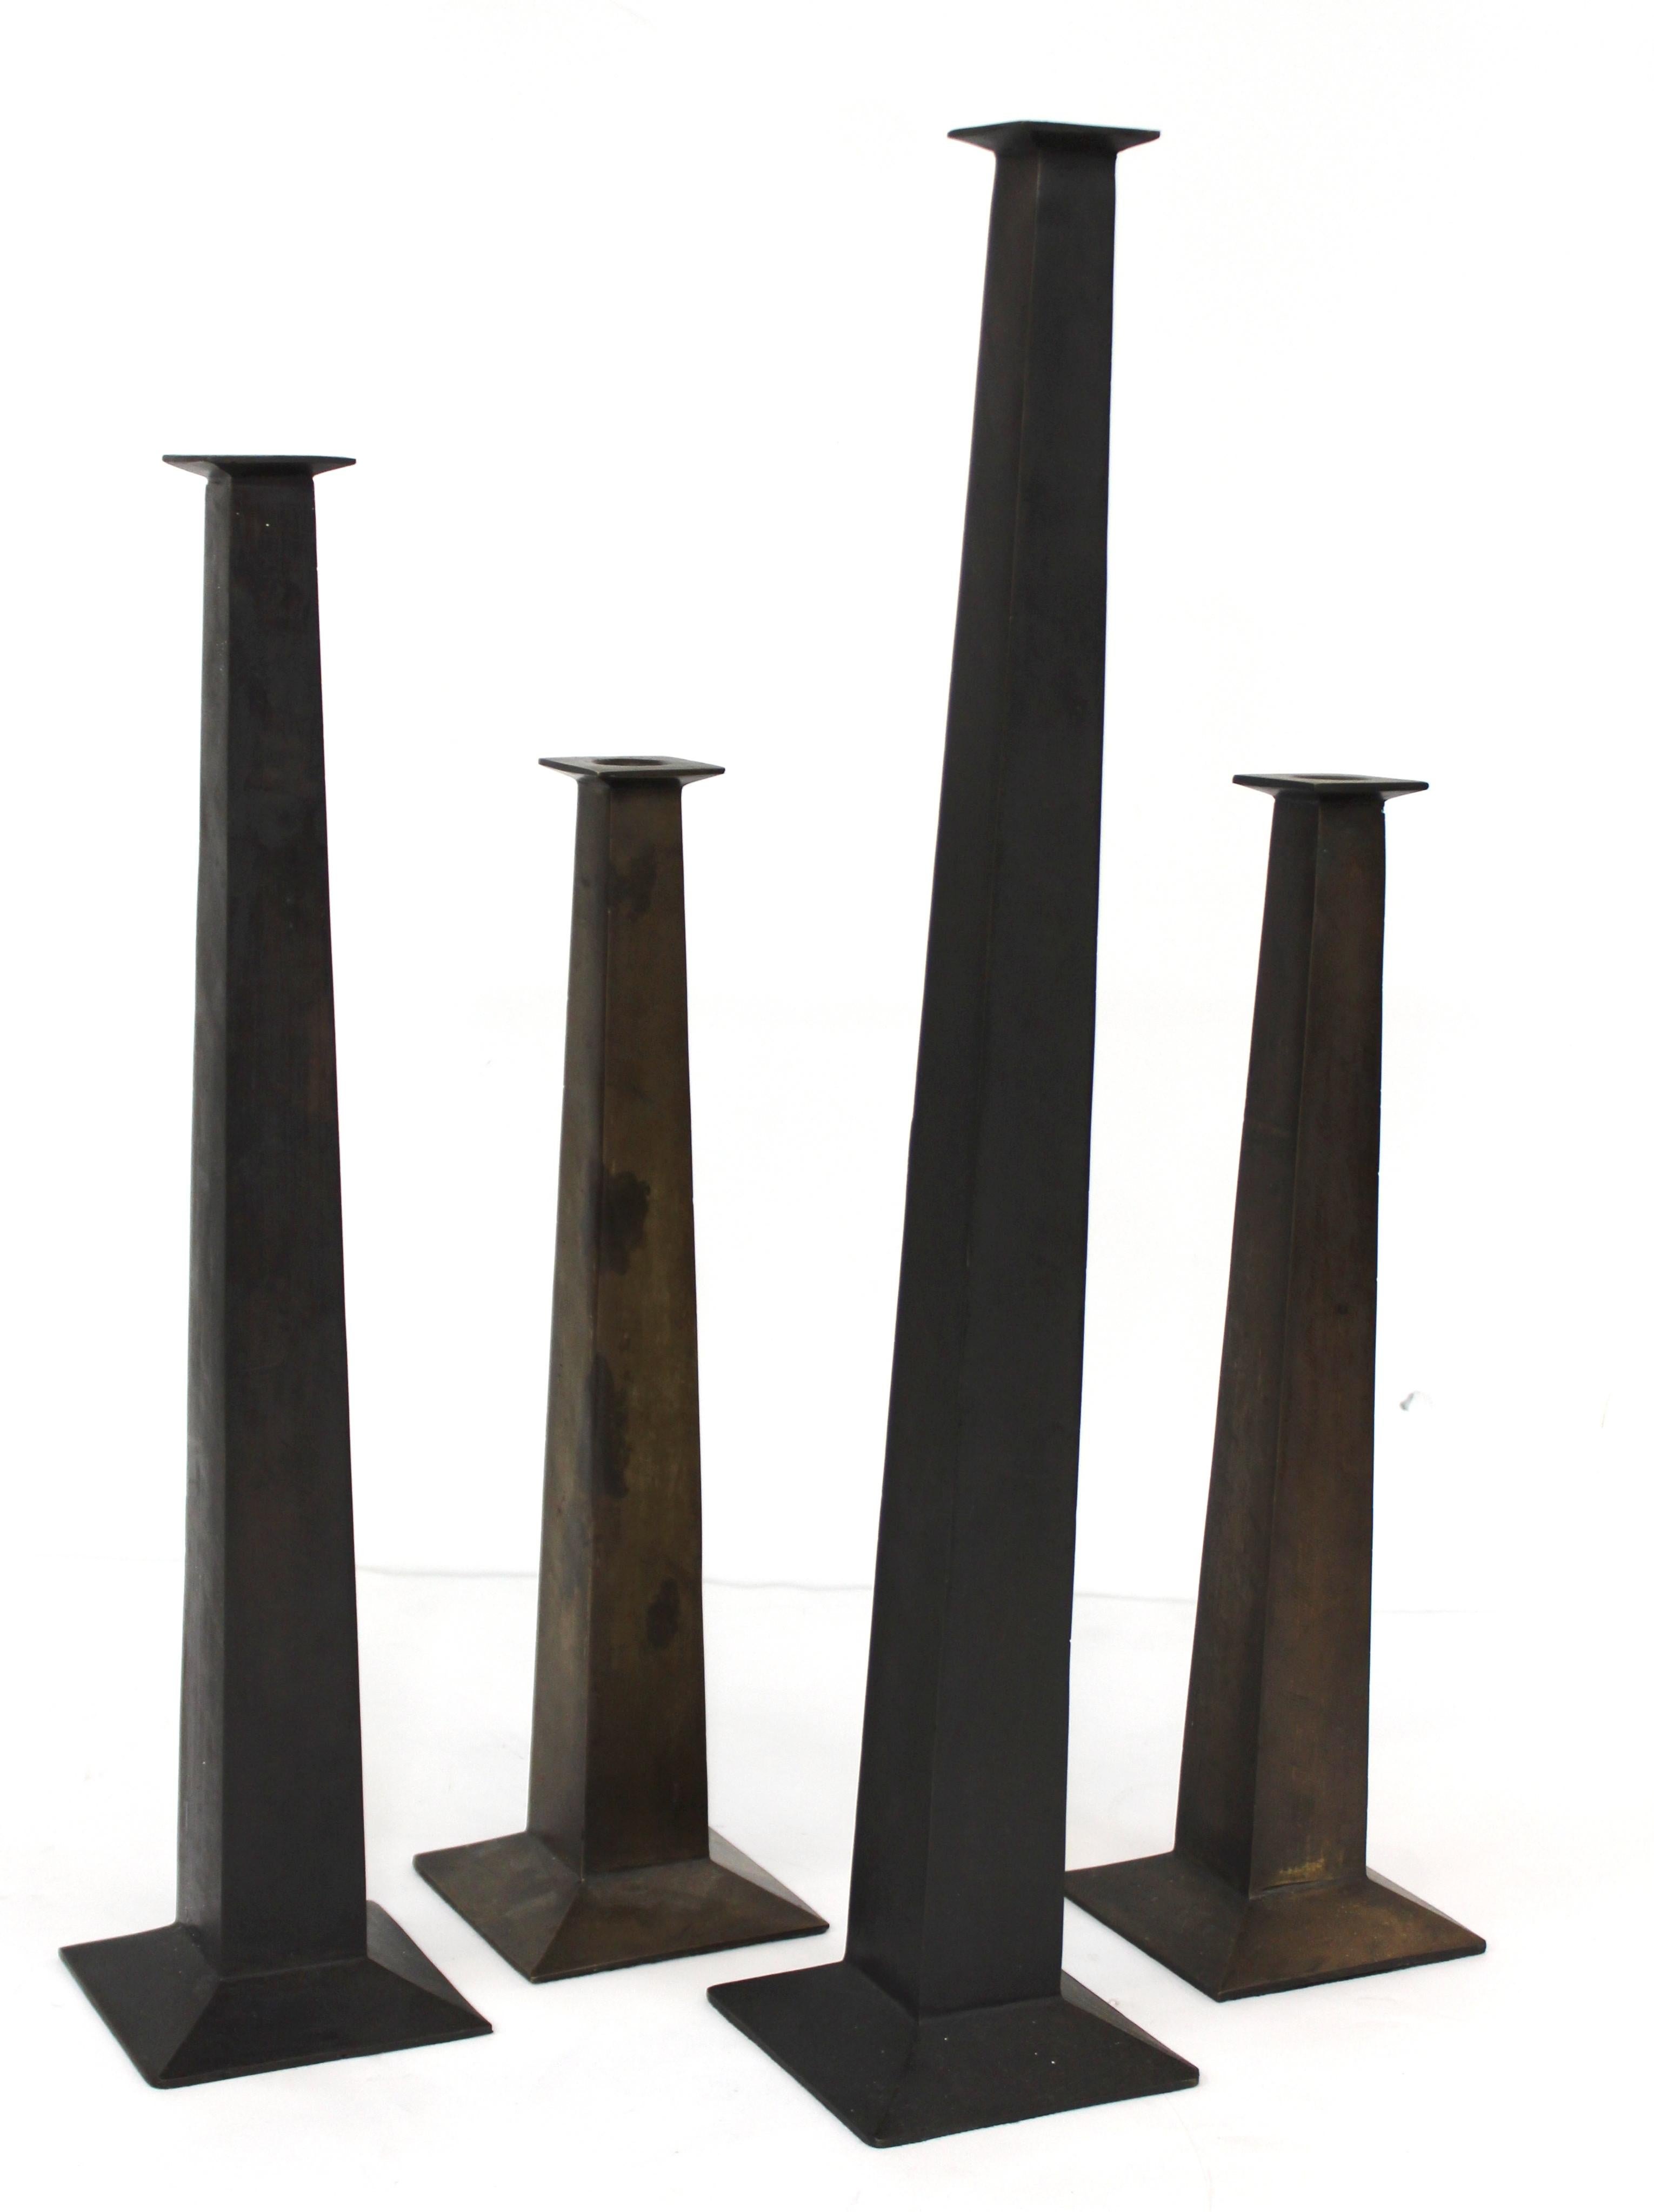 Modern metal set of four individual candlesticks in three different height sizes with a rough metal texture. The set is in great vintage condition with age-appropriate wear.